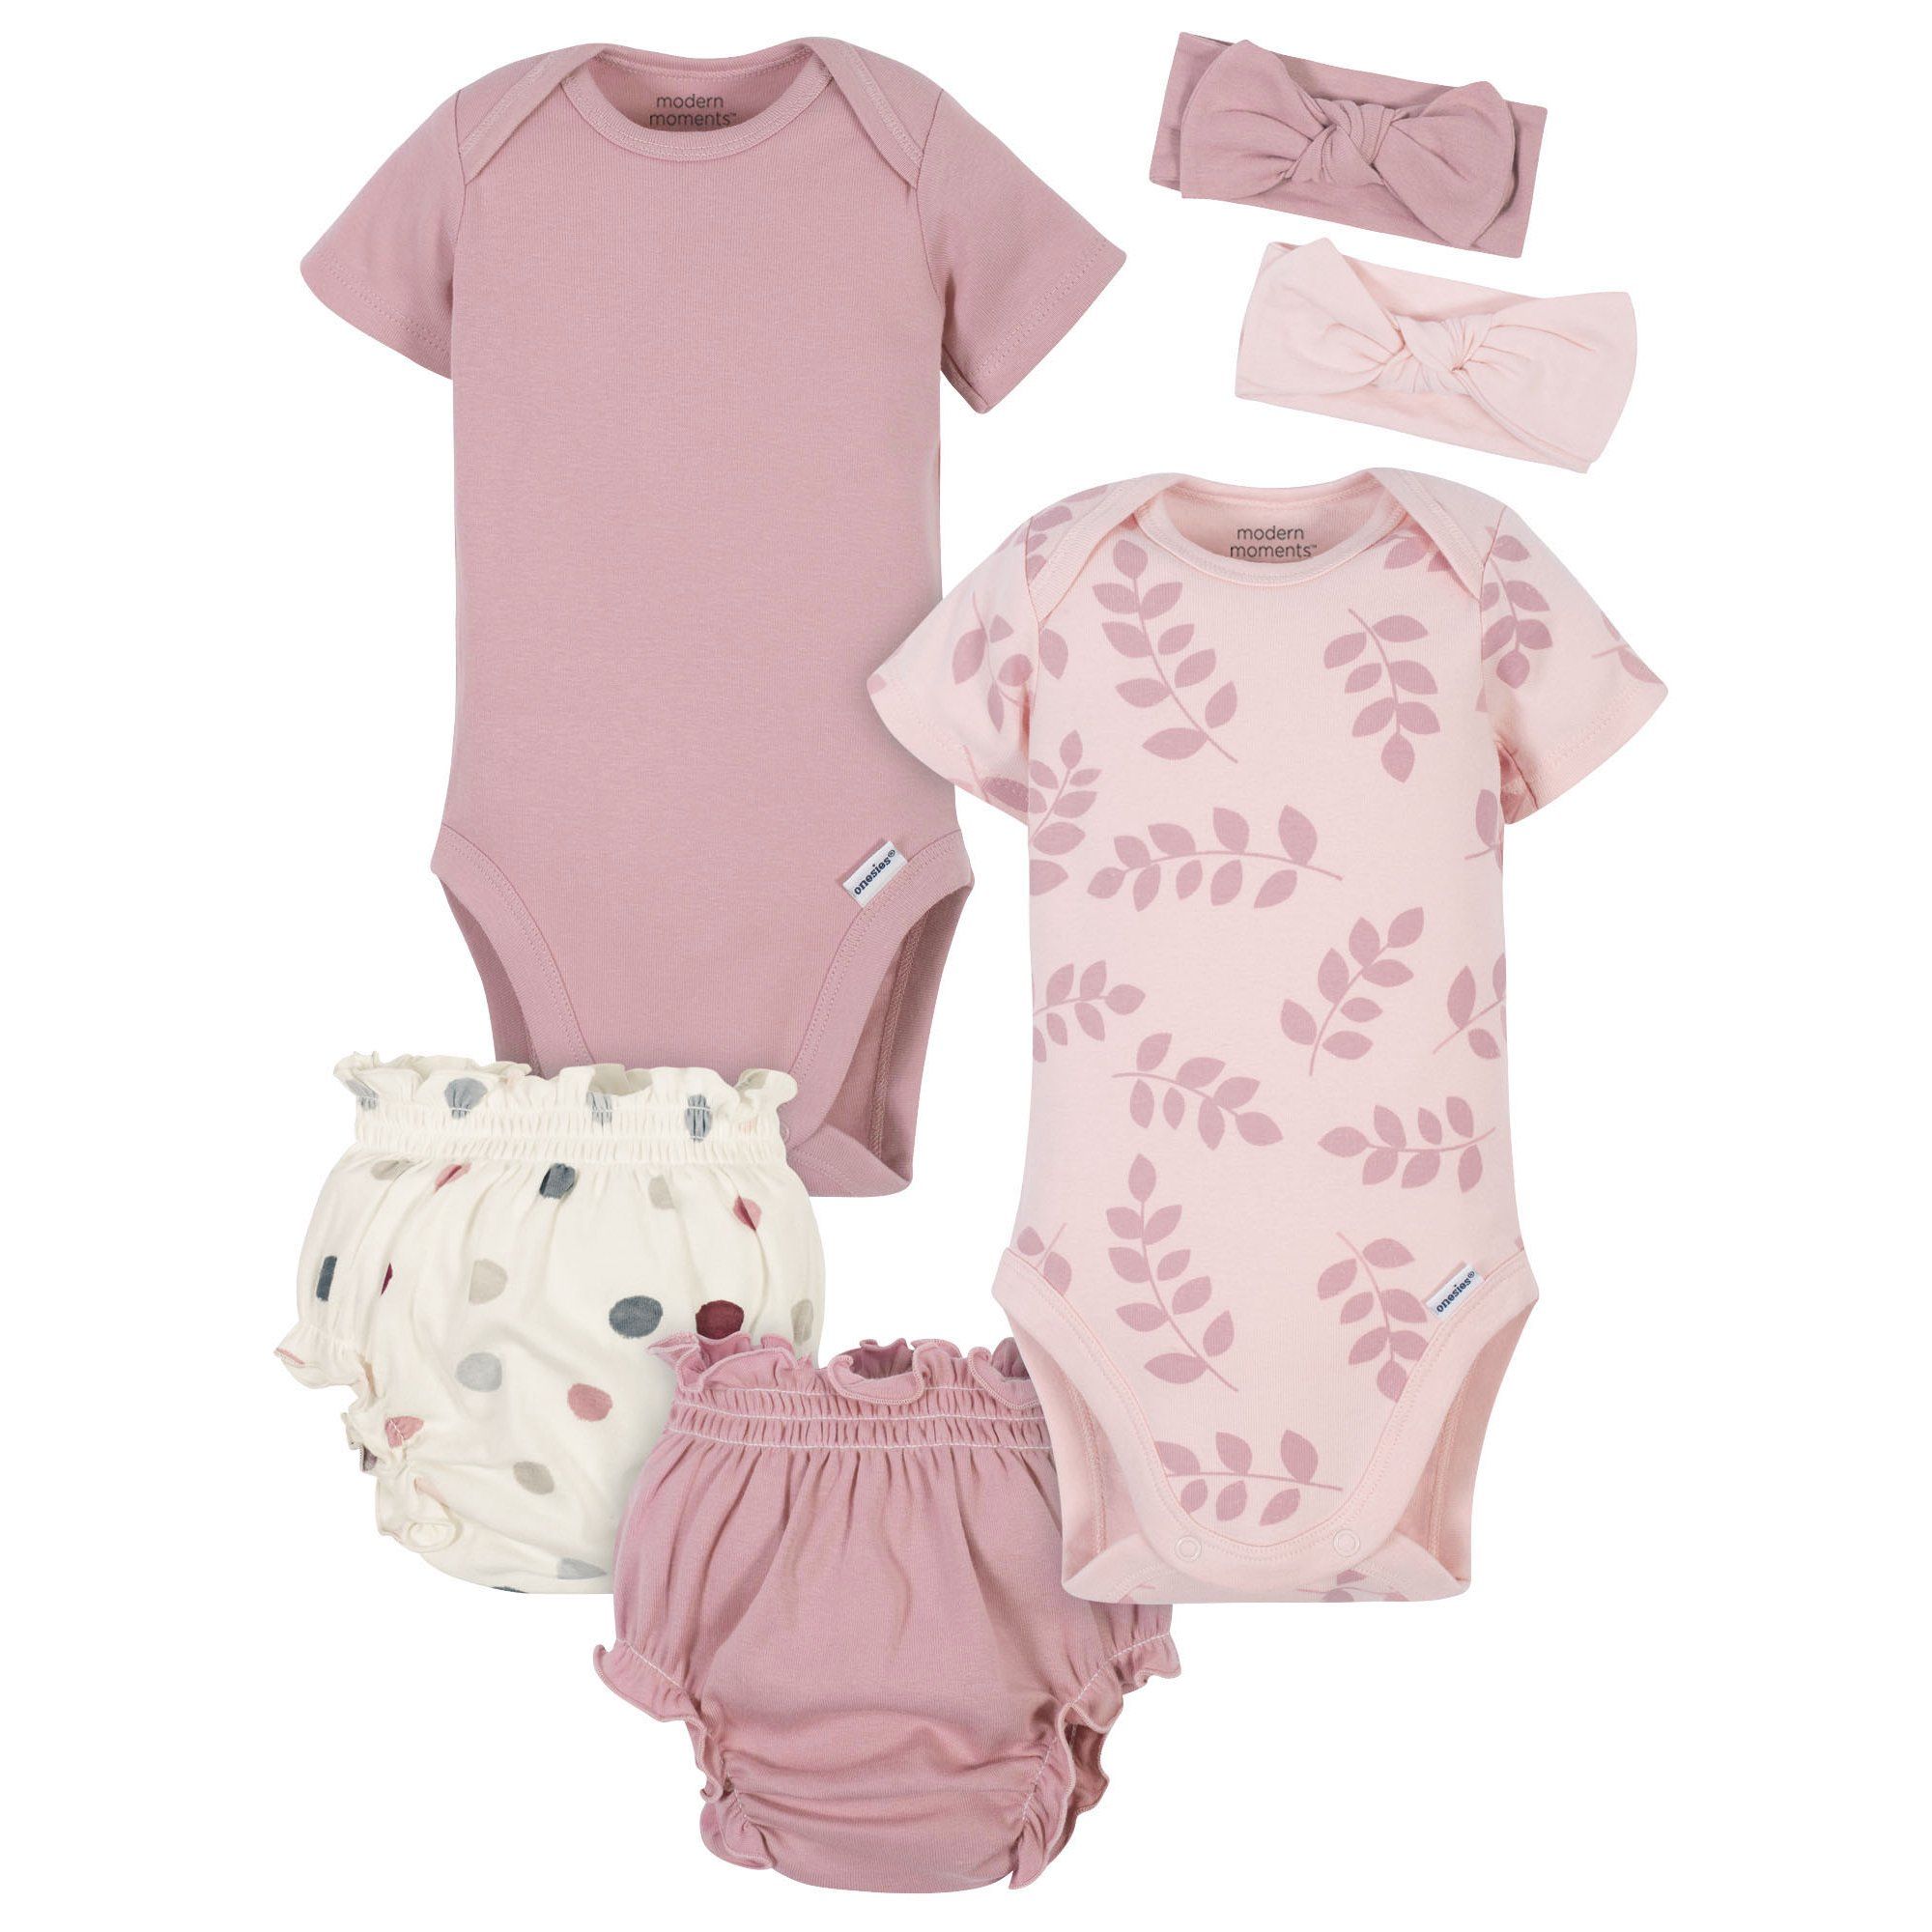 Modern Moments by Gerber Baby Girl Onesies Bodysuits, Diaper Cover, and Headband Set, 6-Piece | Walmart (US)